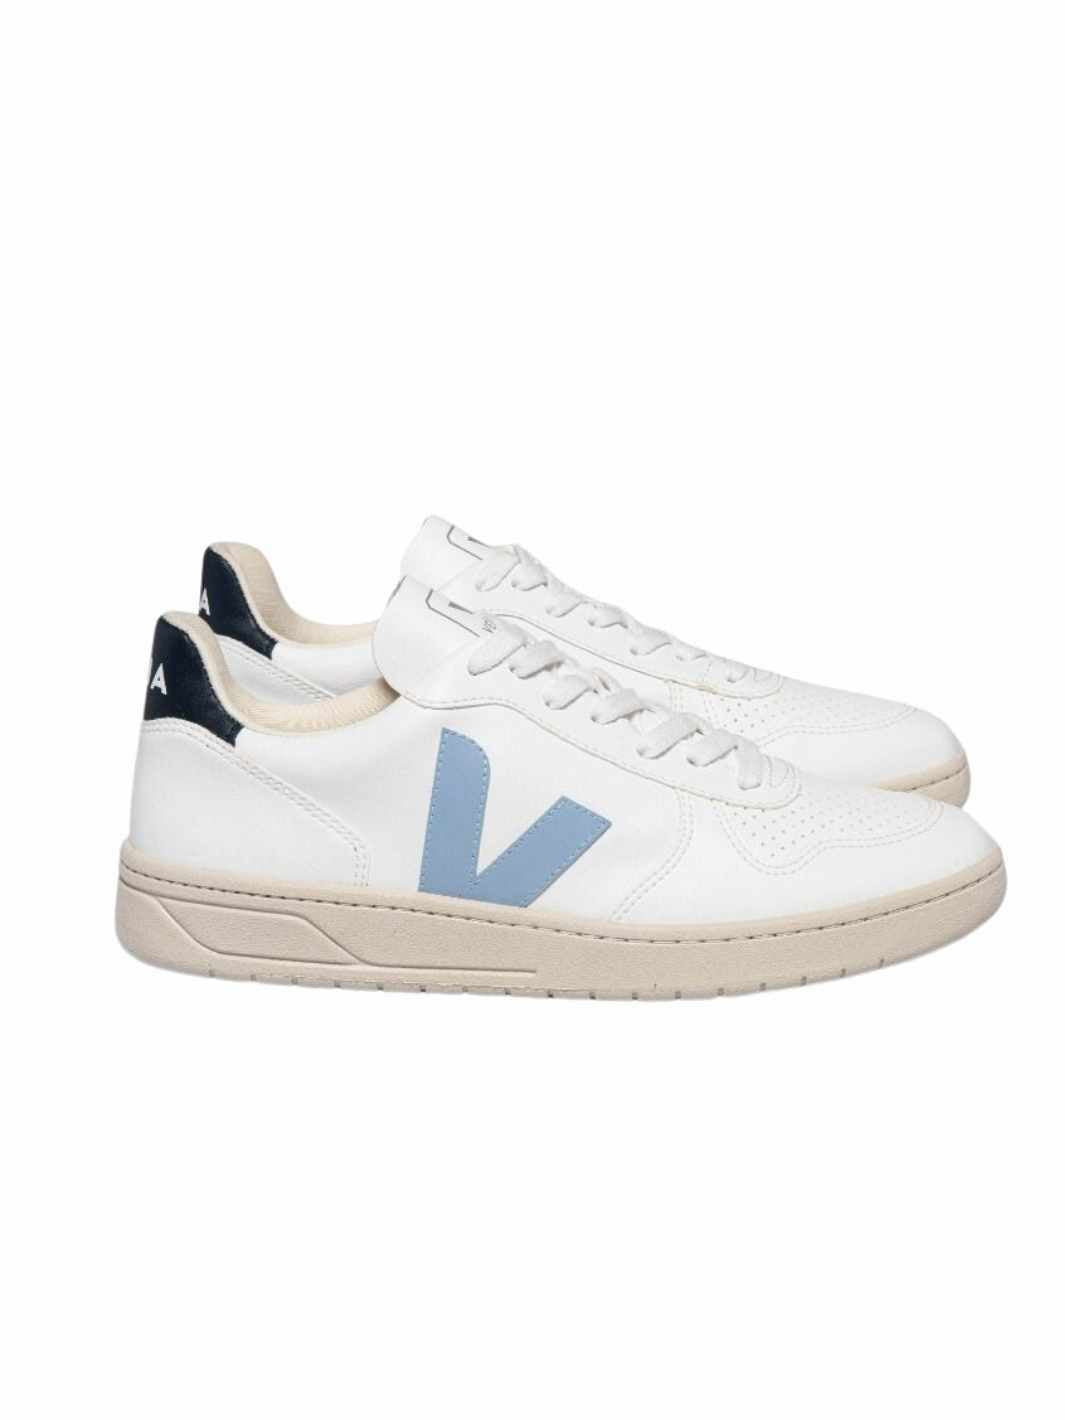 Veja Shoes Sneakers | V10 Leather White Steel Nautico